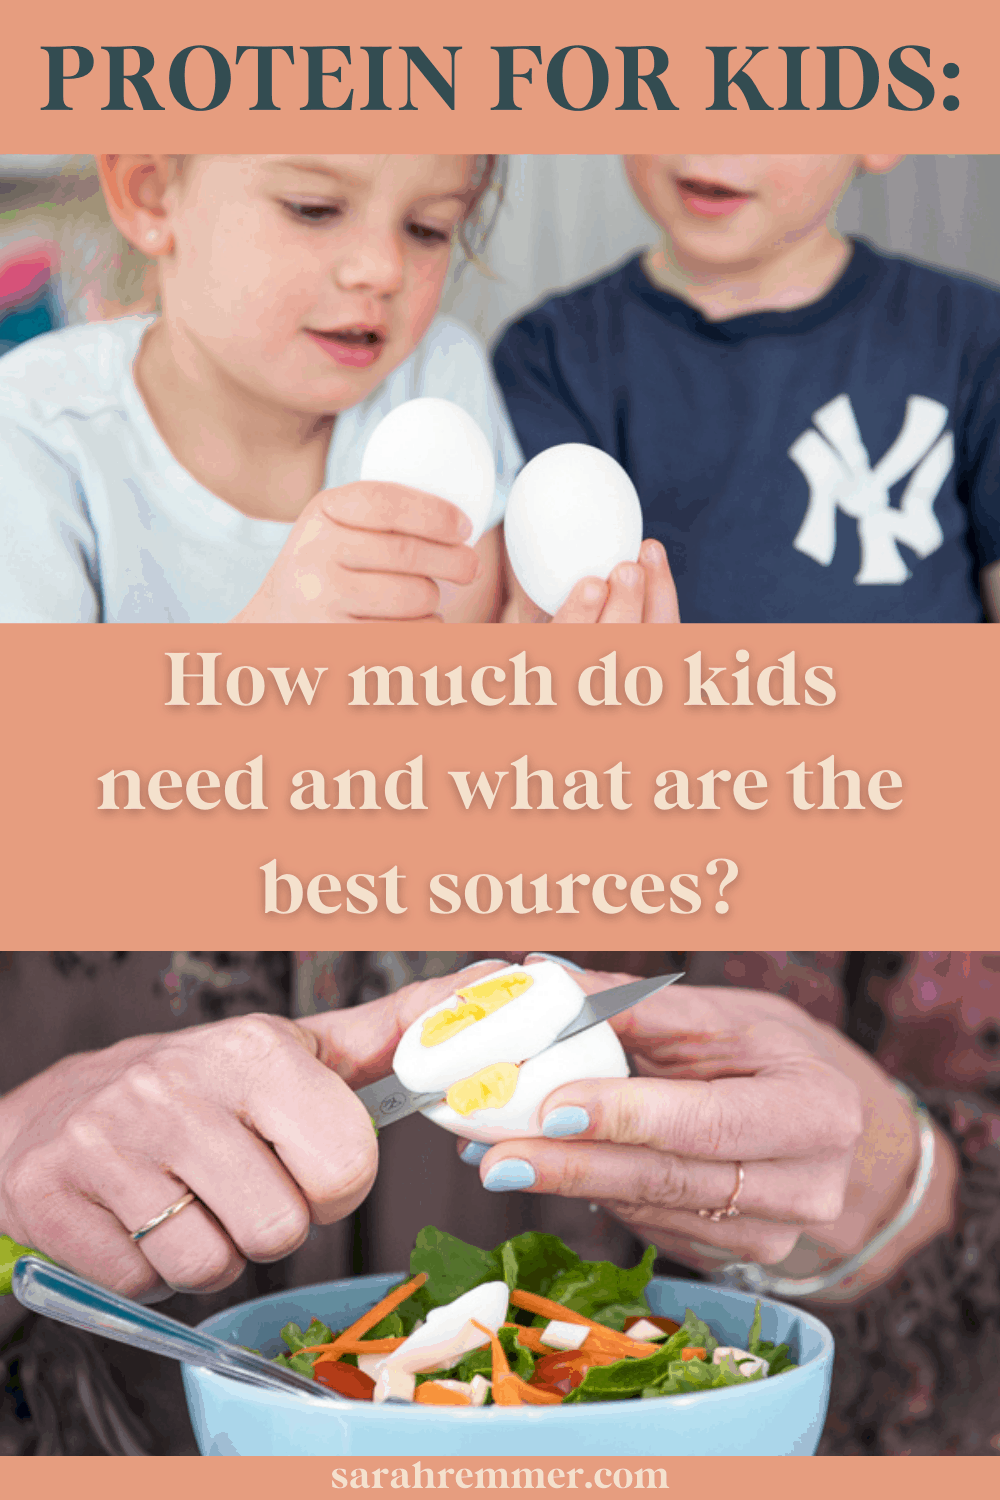 protein for kids - how much do they need?